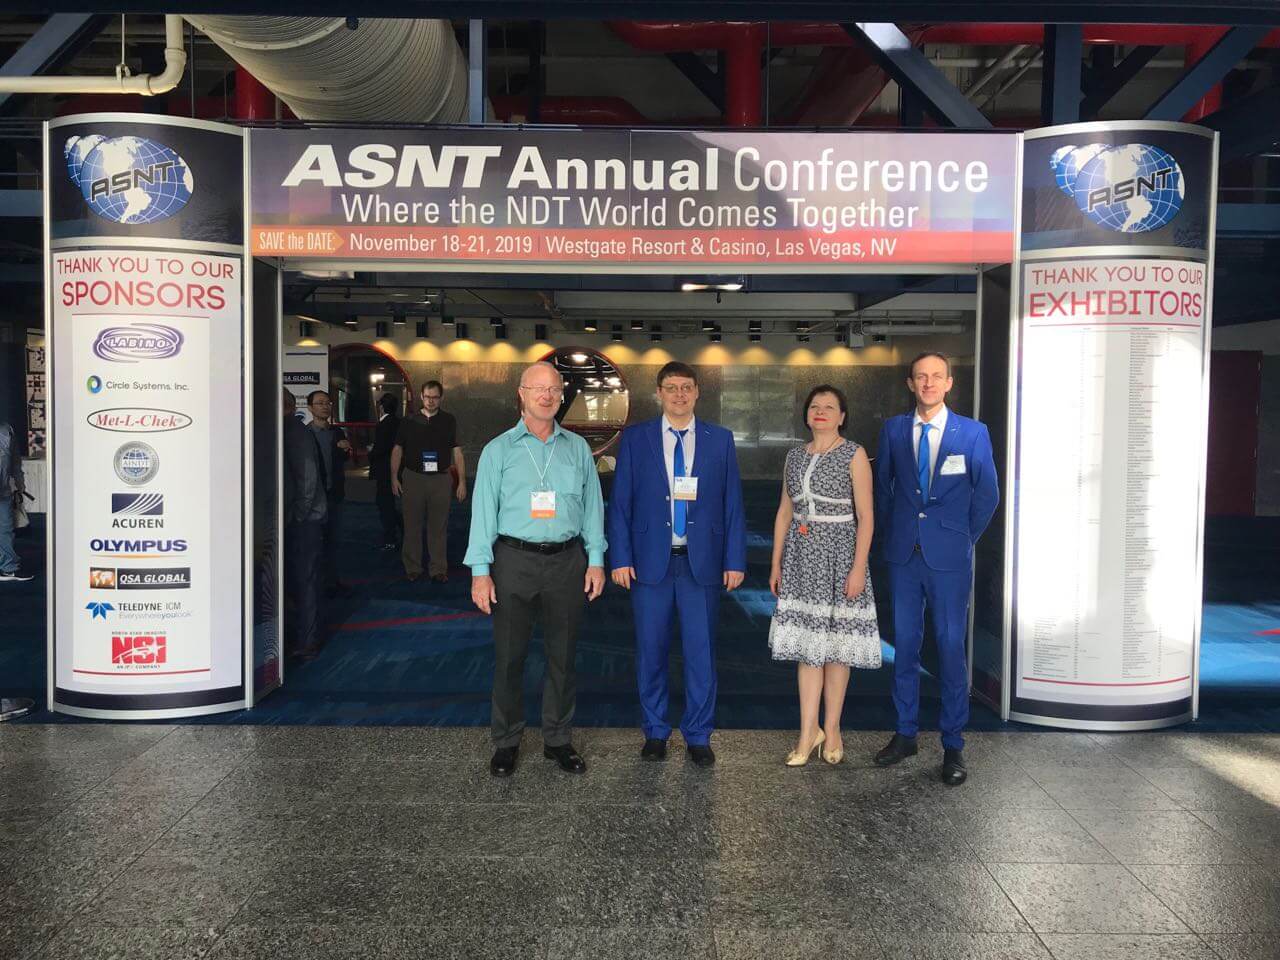 Delegates of OKOndt at the entrance to the Annual International Exhibition of NDT ASNT-19